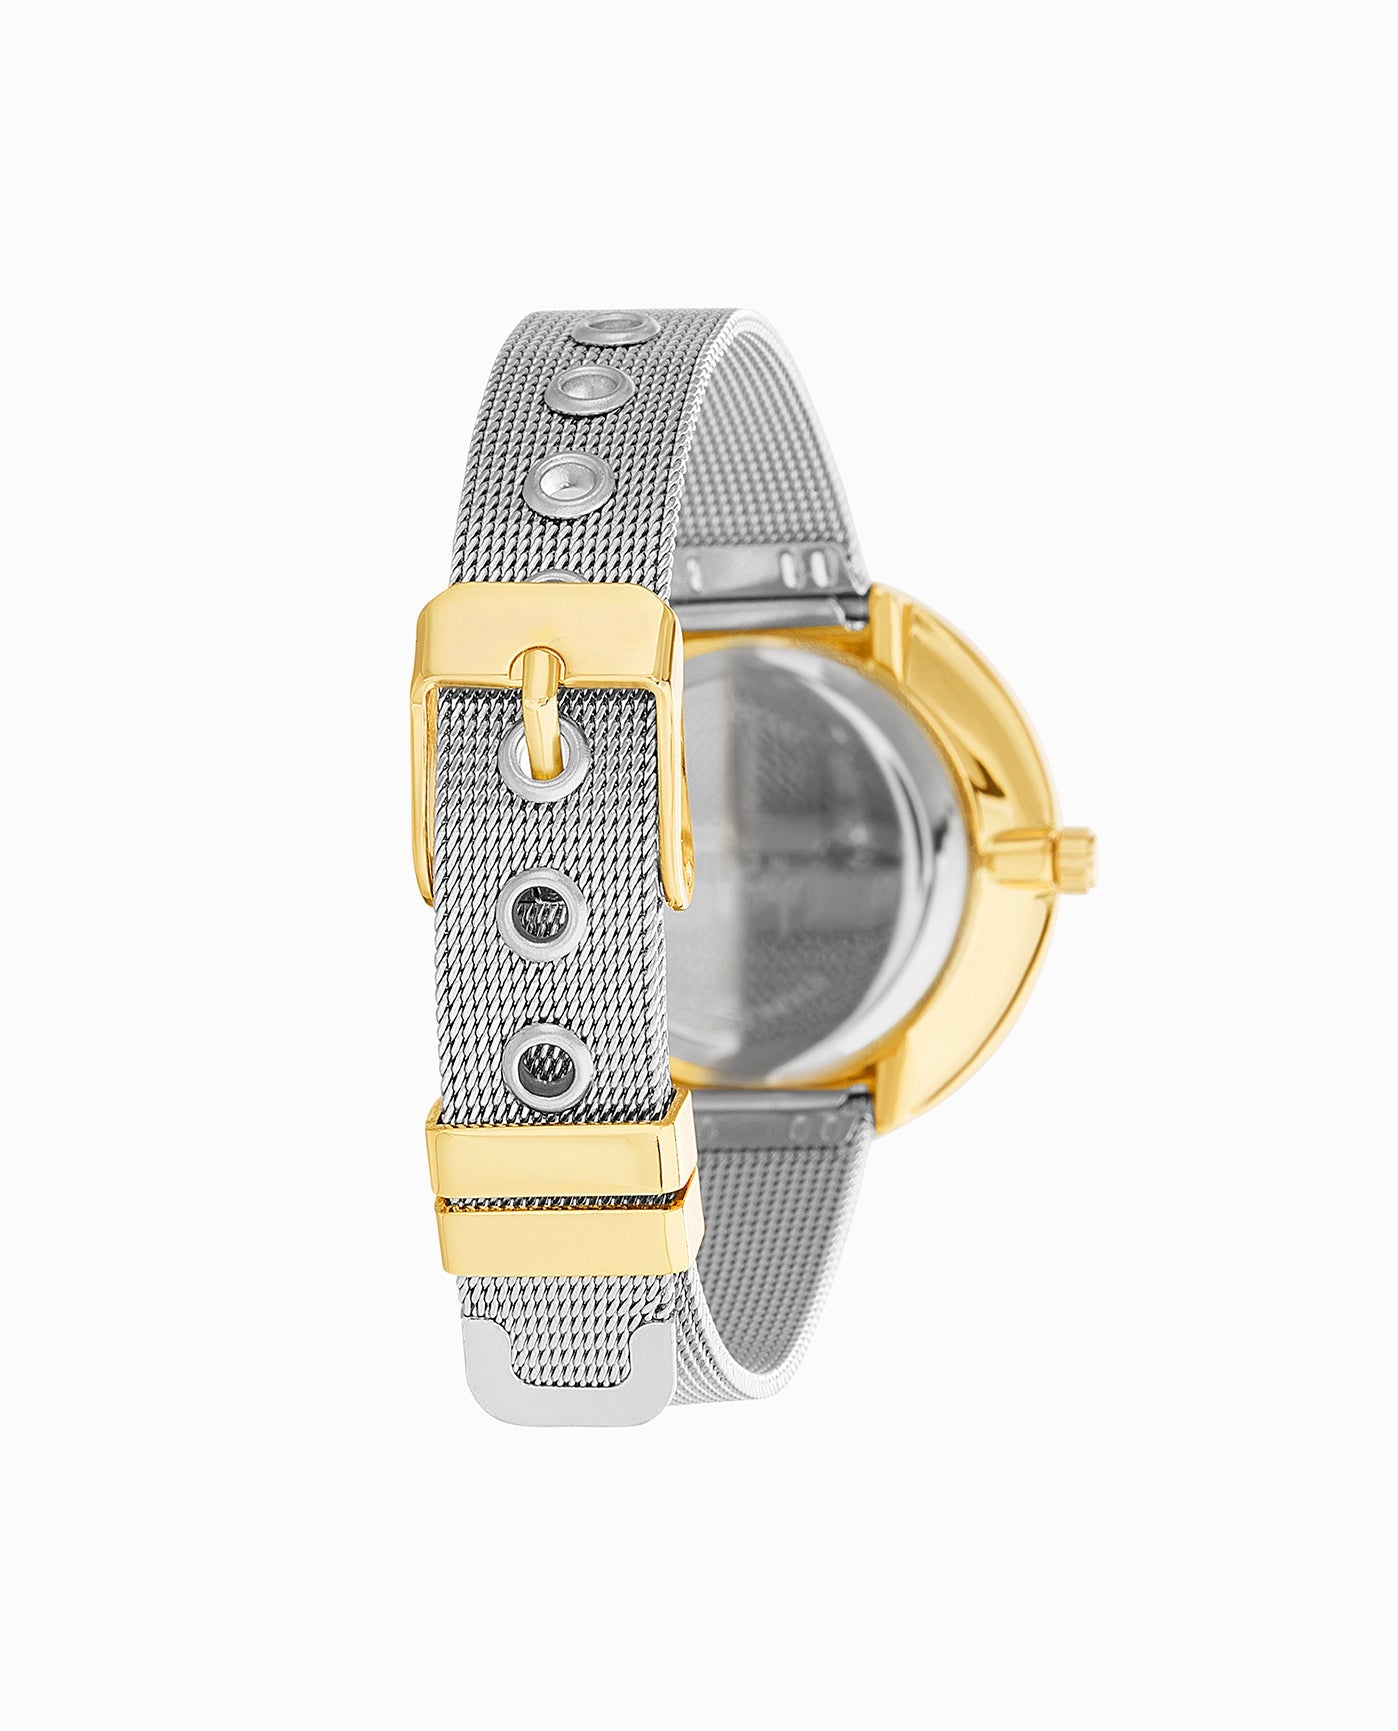 GOLD TONE STAINLESS STEEL STRAP WATCH, 36mm BAND CLOSE UP | Gold And Silver